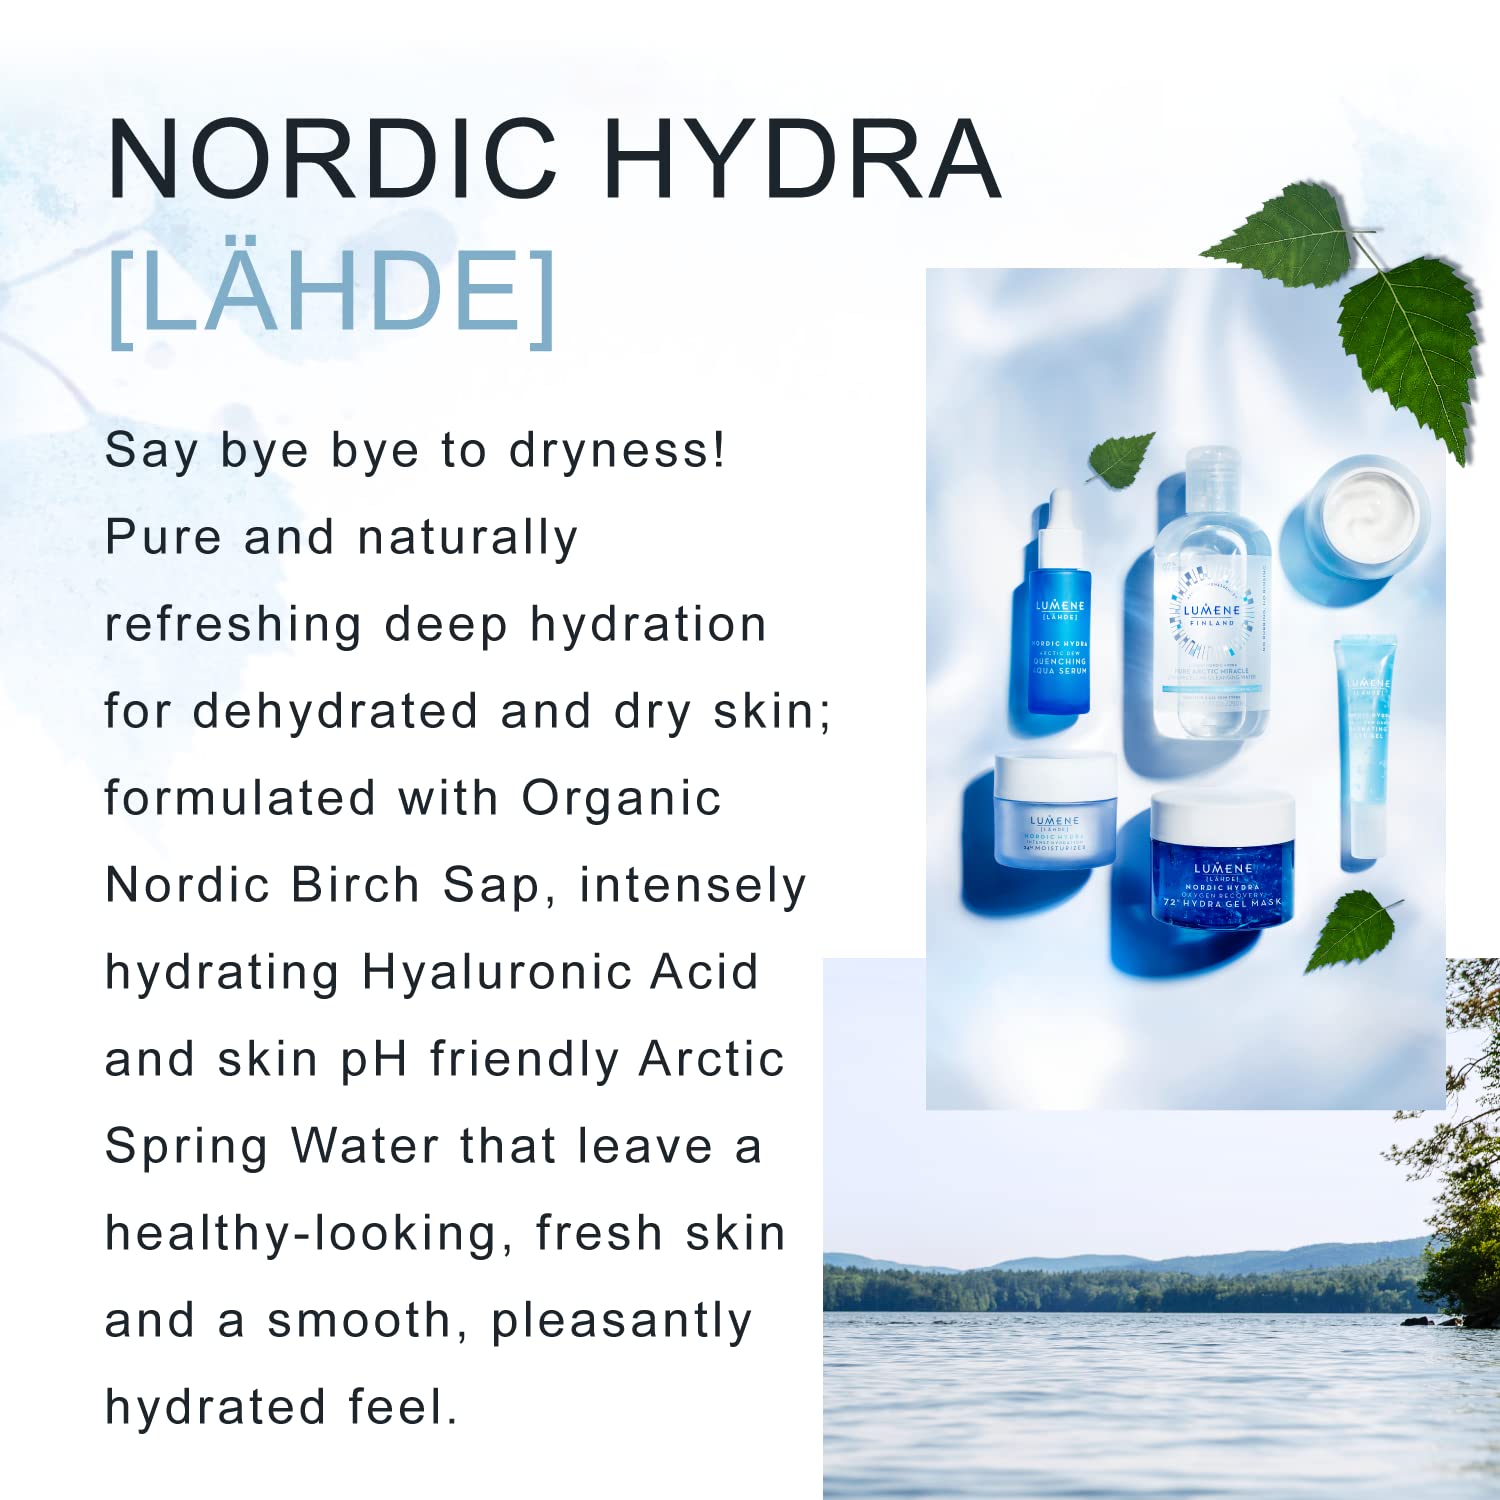 Lumene Nordic Hydra Arctic Aqua Foaming Cleanser - Daily Facial Cleanser that Purifies Skin and Removes Waterproof Makeup - pH Friendly Foaming Face Wash & Deep Gentle Cleanser (150ml)